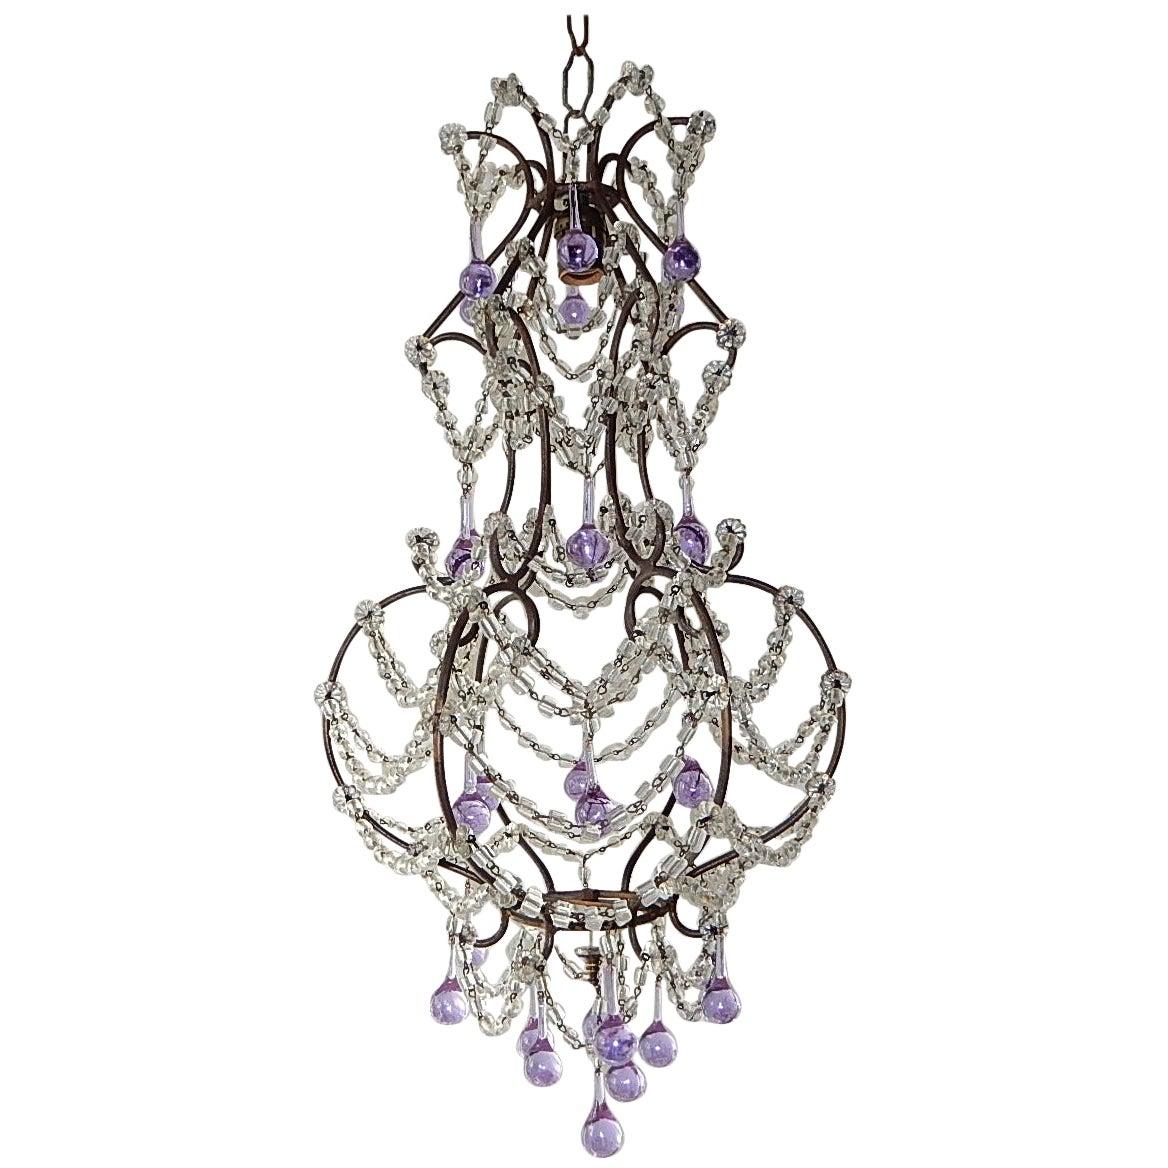 French Lavender Purple Drops with Beaded Swags Chandelier, circa 1920